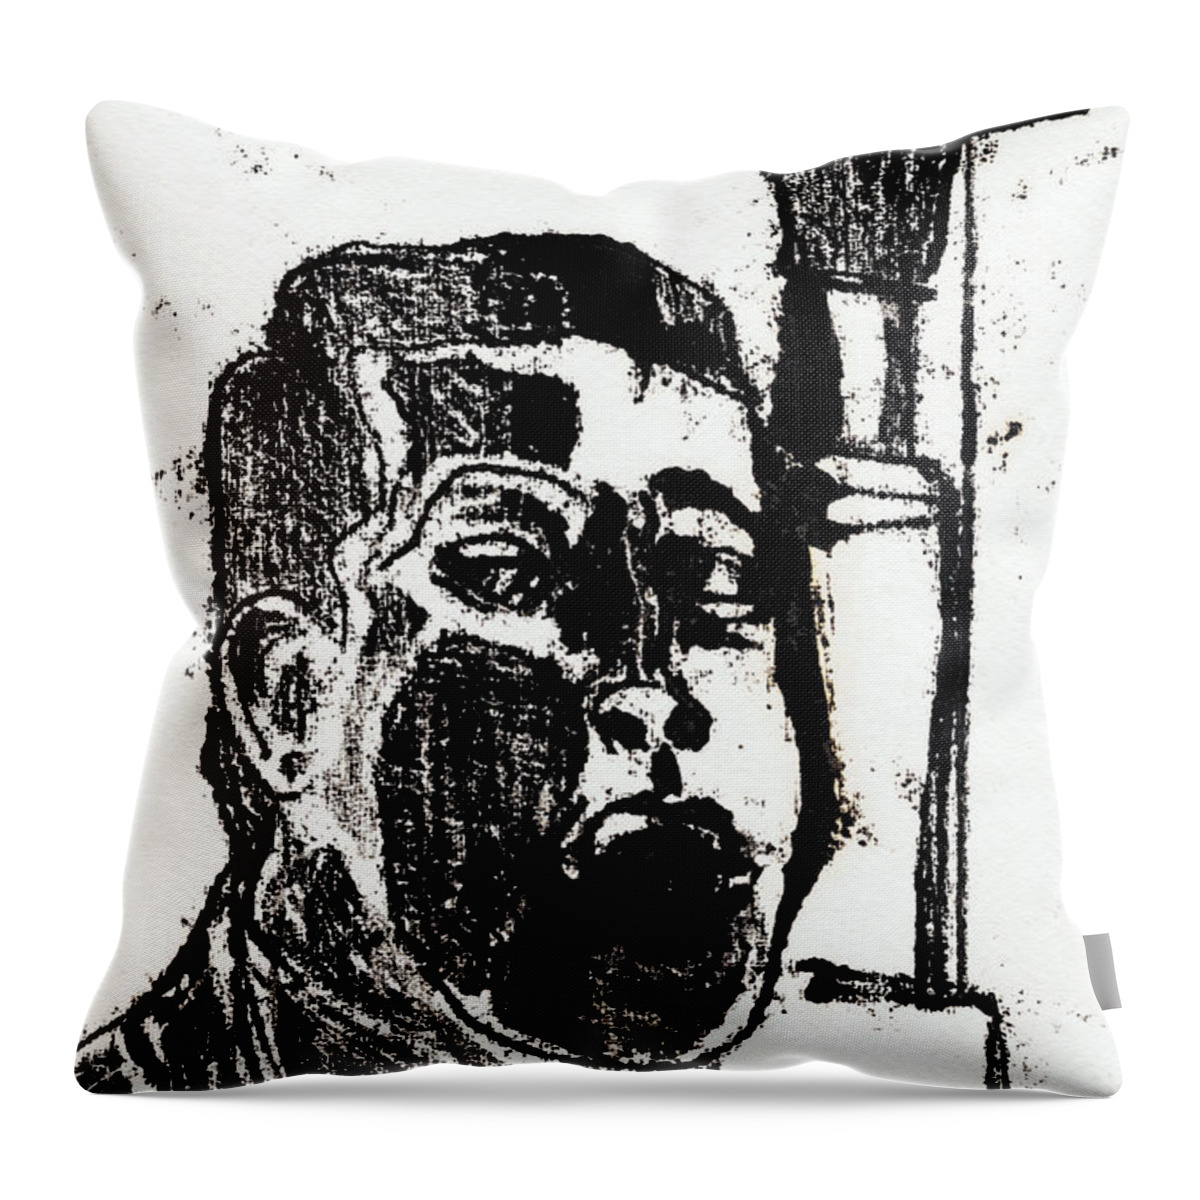 Face Throw Pillow featuring the drawing Man by a Plinth by Edgeworth Johnstone